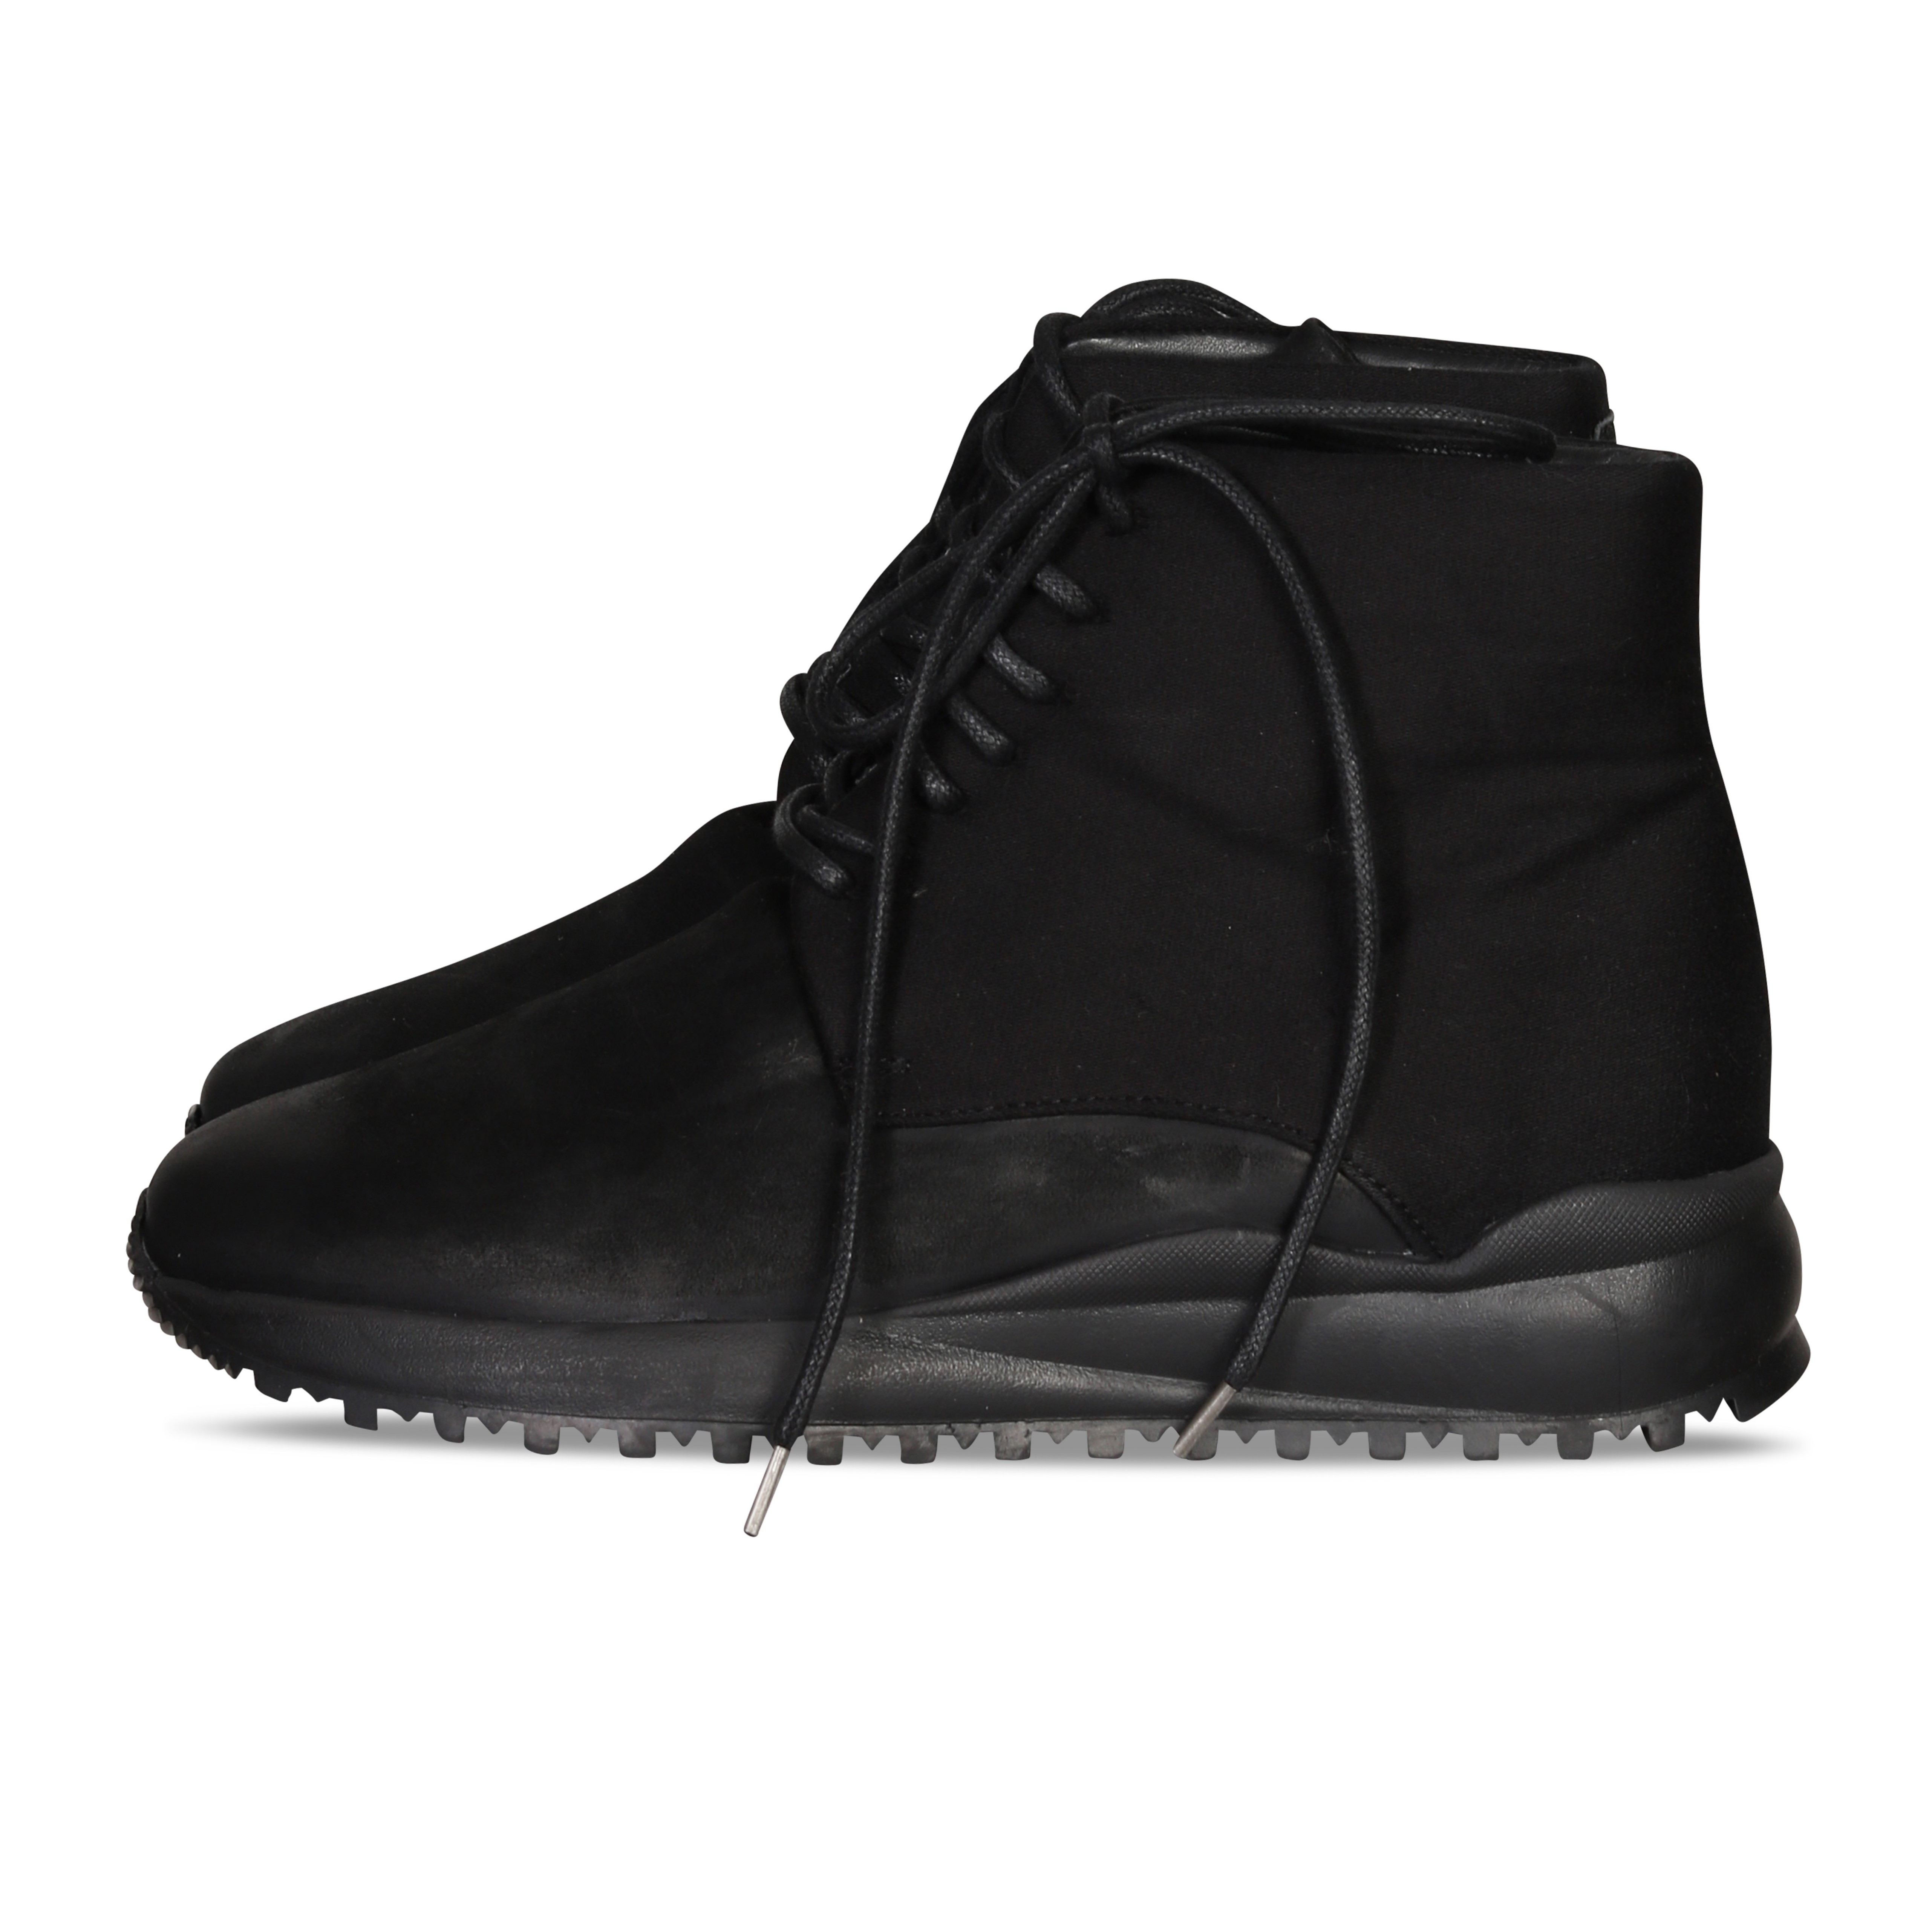 Hannes Roether Boots in Black